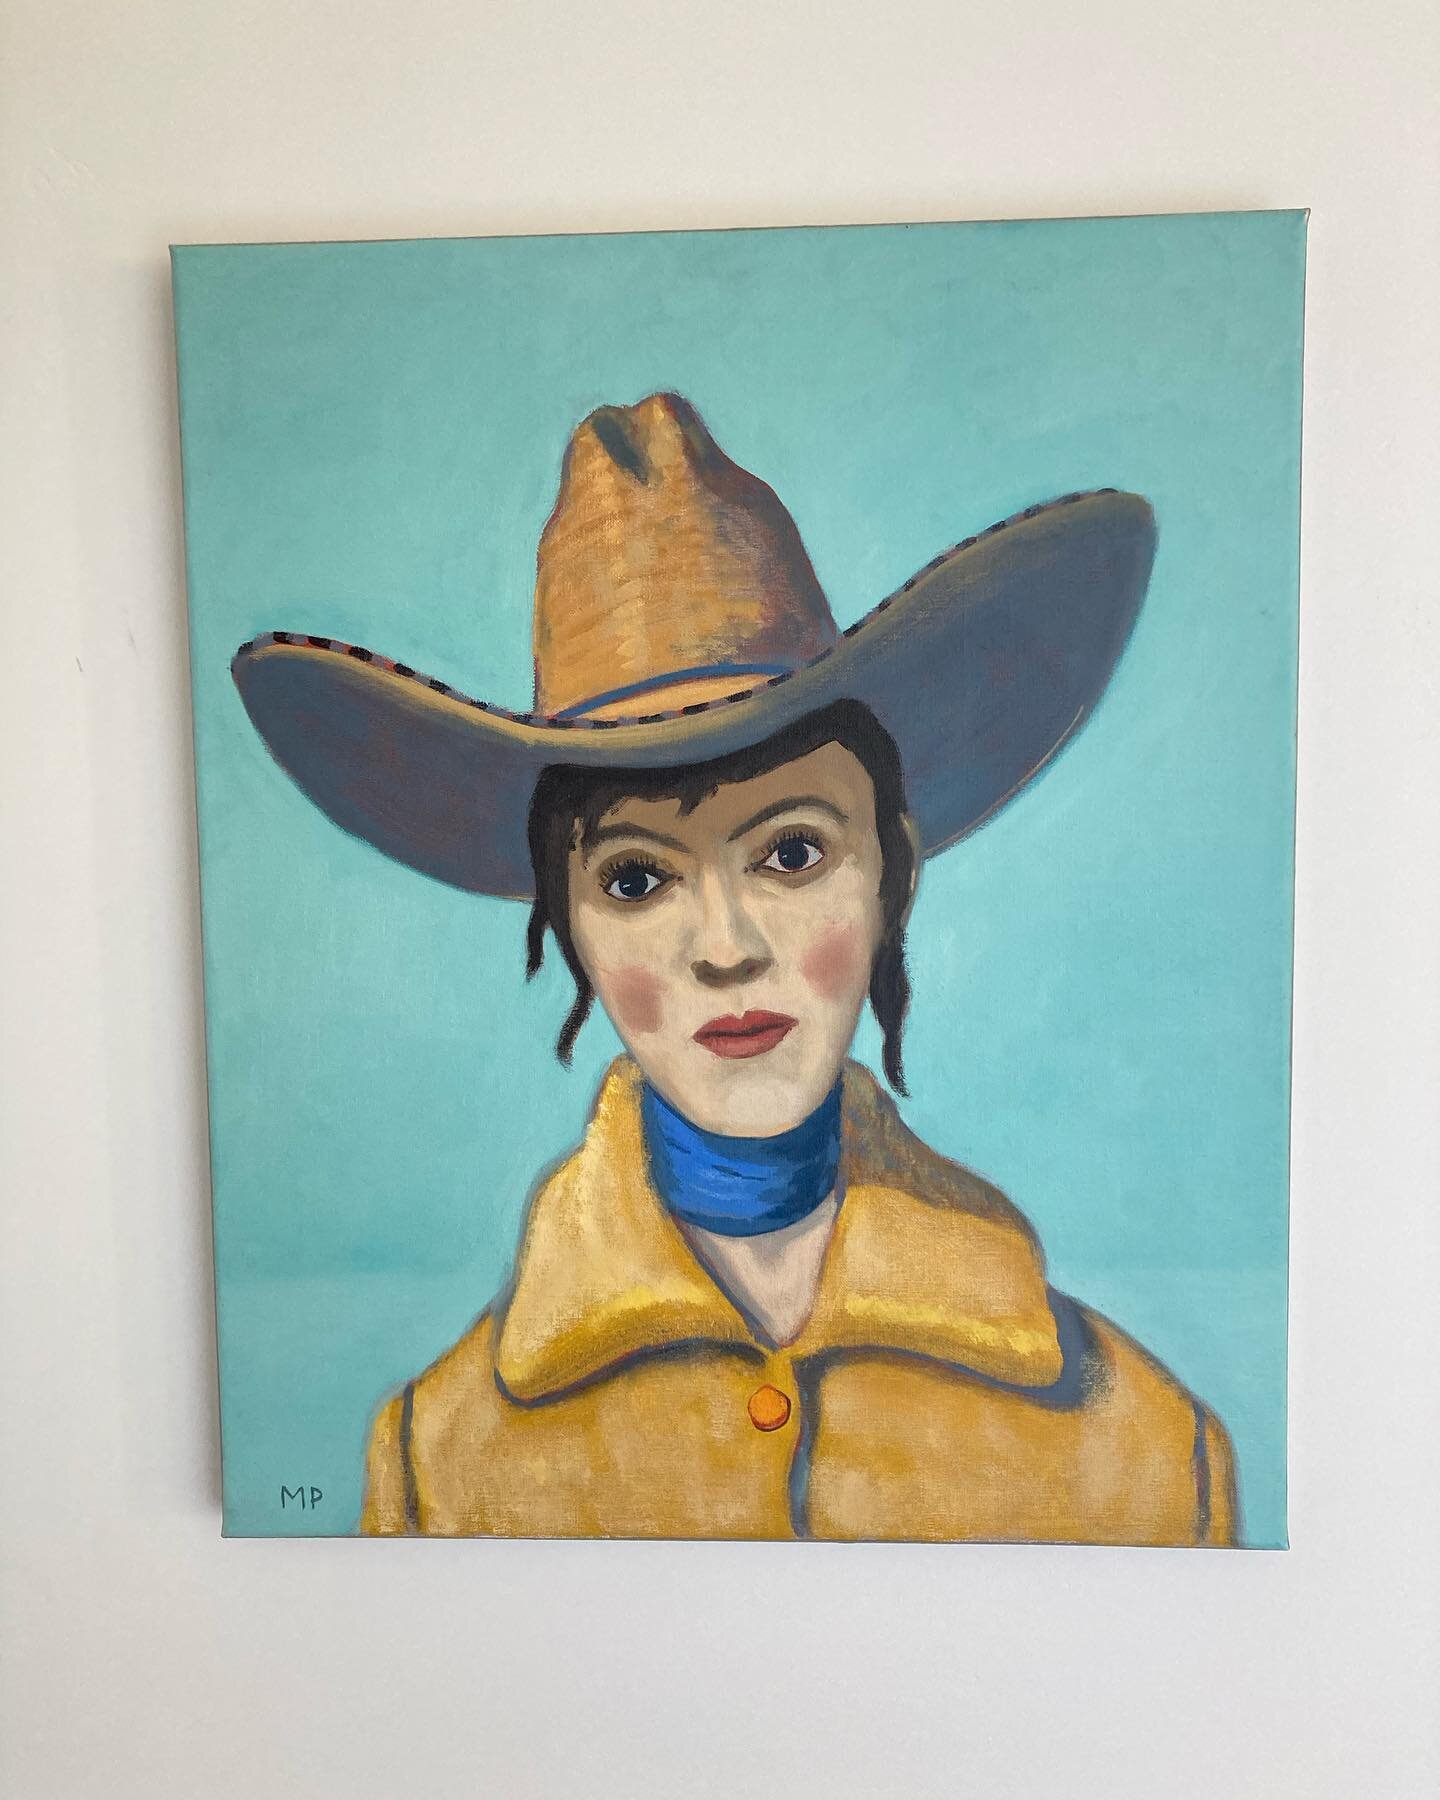 Meet Margaret the Cowgirl @tayloepiggottgallery @mpiggott22 
What kind of art do you choose for your walls?  #interiors #design #love

She loves it here✔️